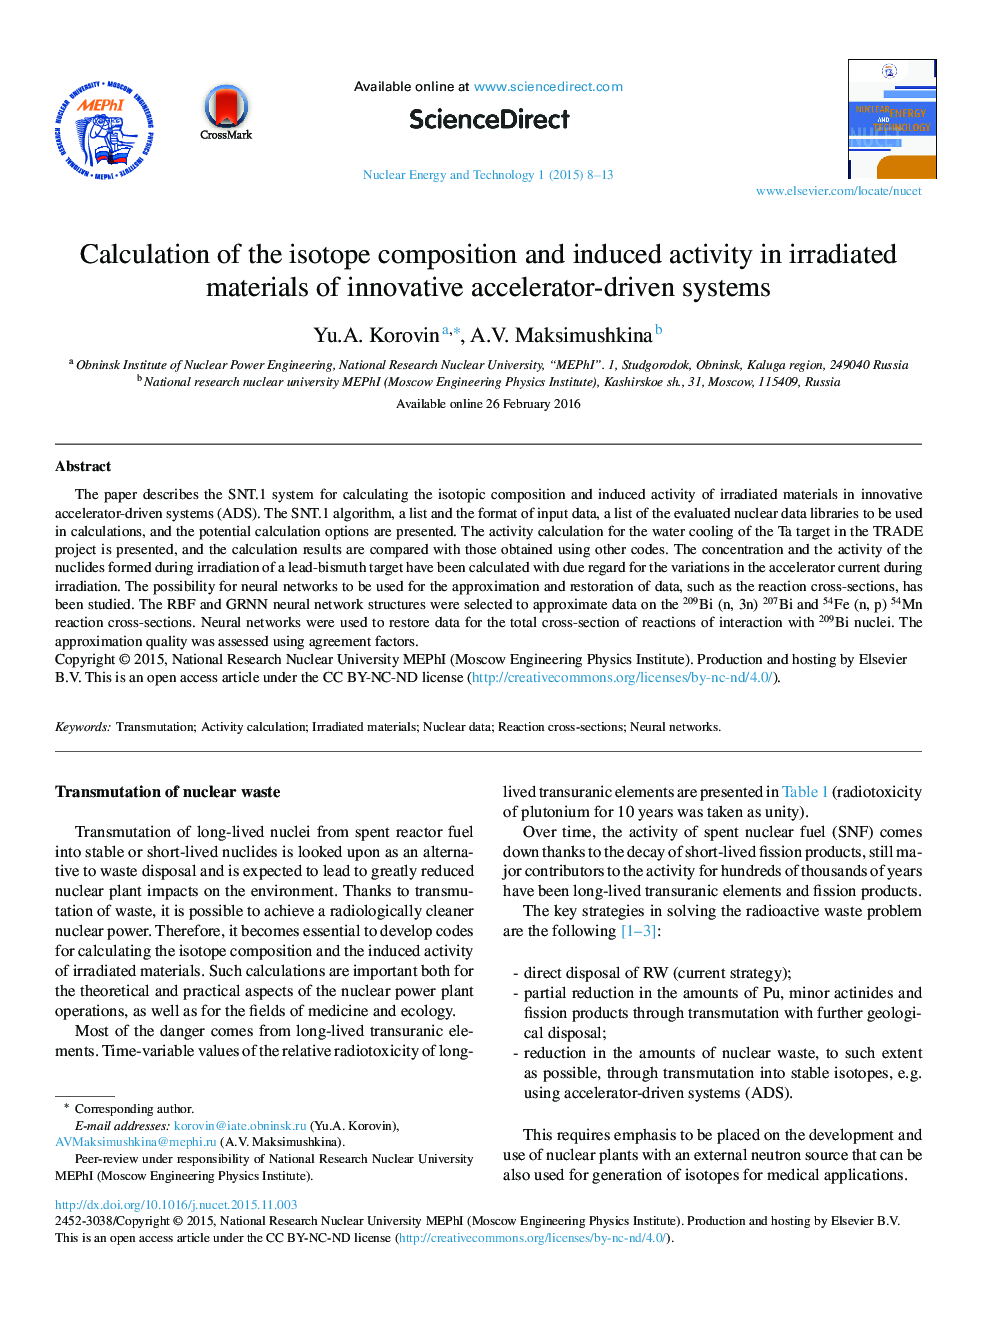 Calculation of the isotope composition and induced activity in irradiated materials of innovative accelerator-driven systems